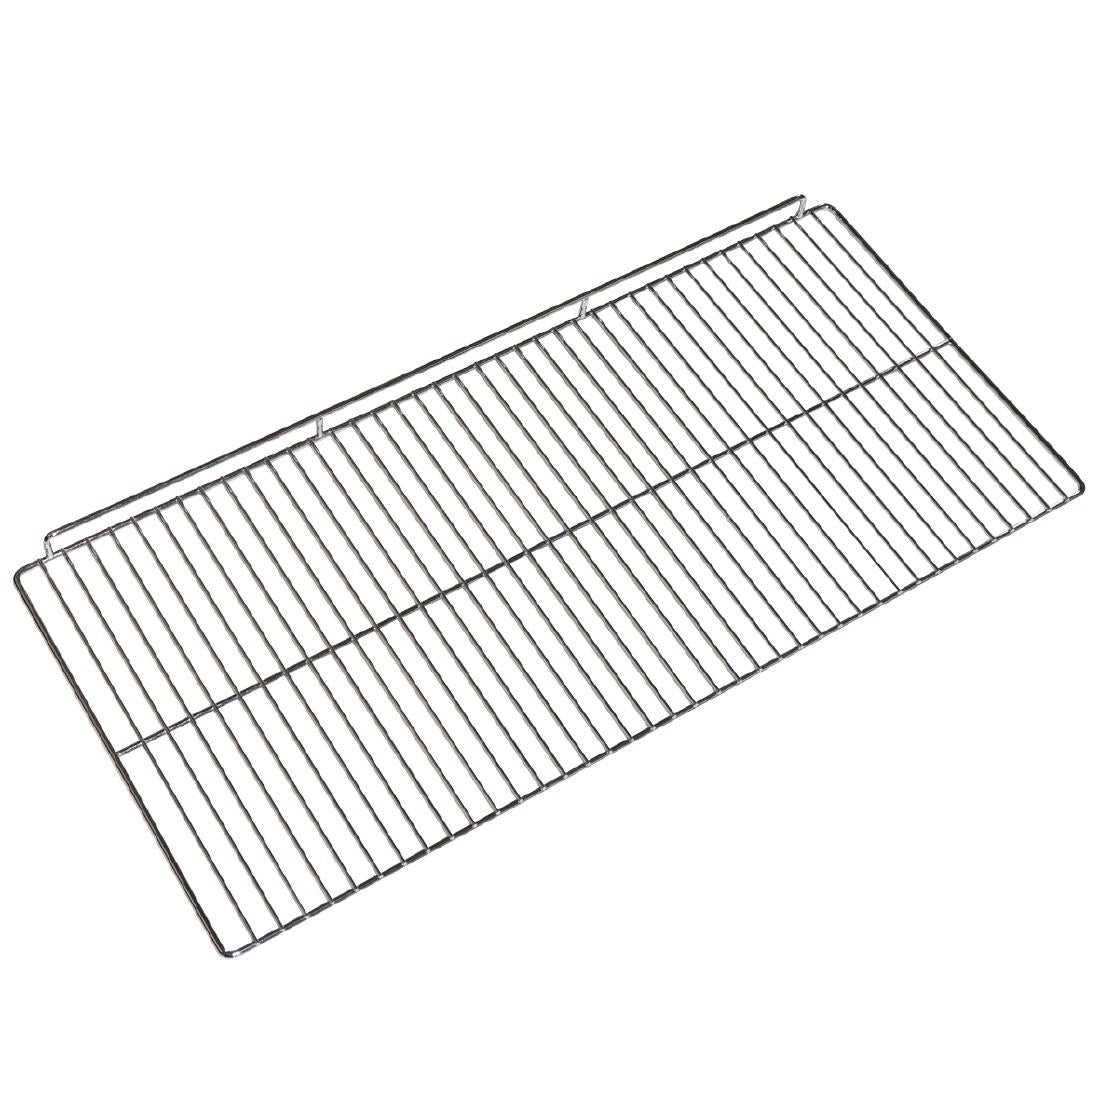 AD422 Replacement Middle Shelf - 813x367x35mm for CD230 CD232 JD Catering Equipment Solutions Ltd